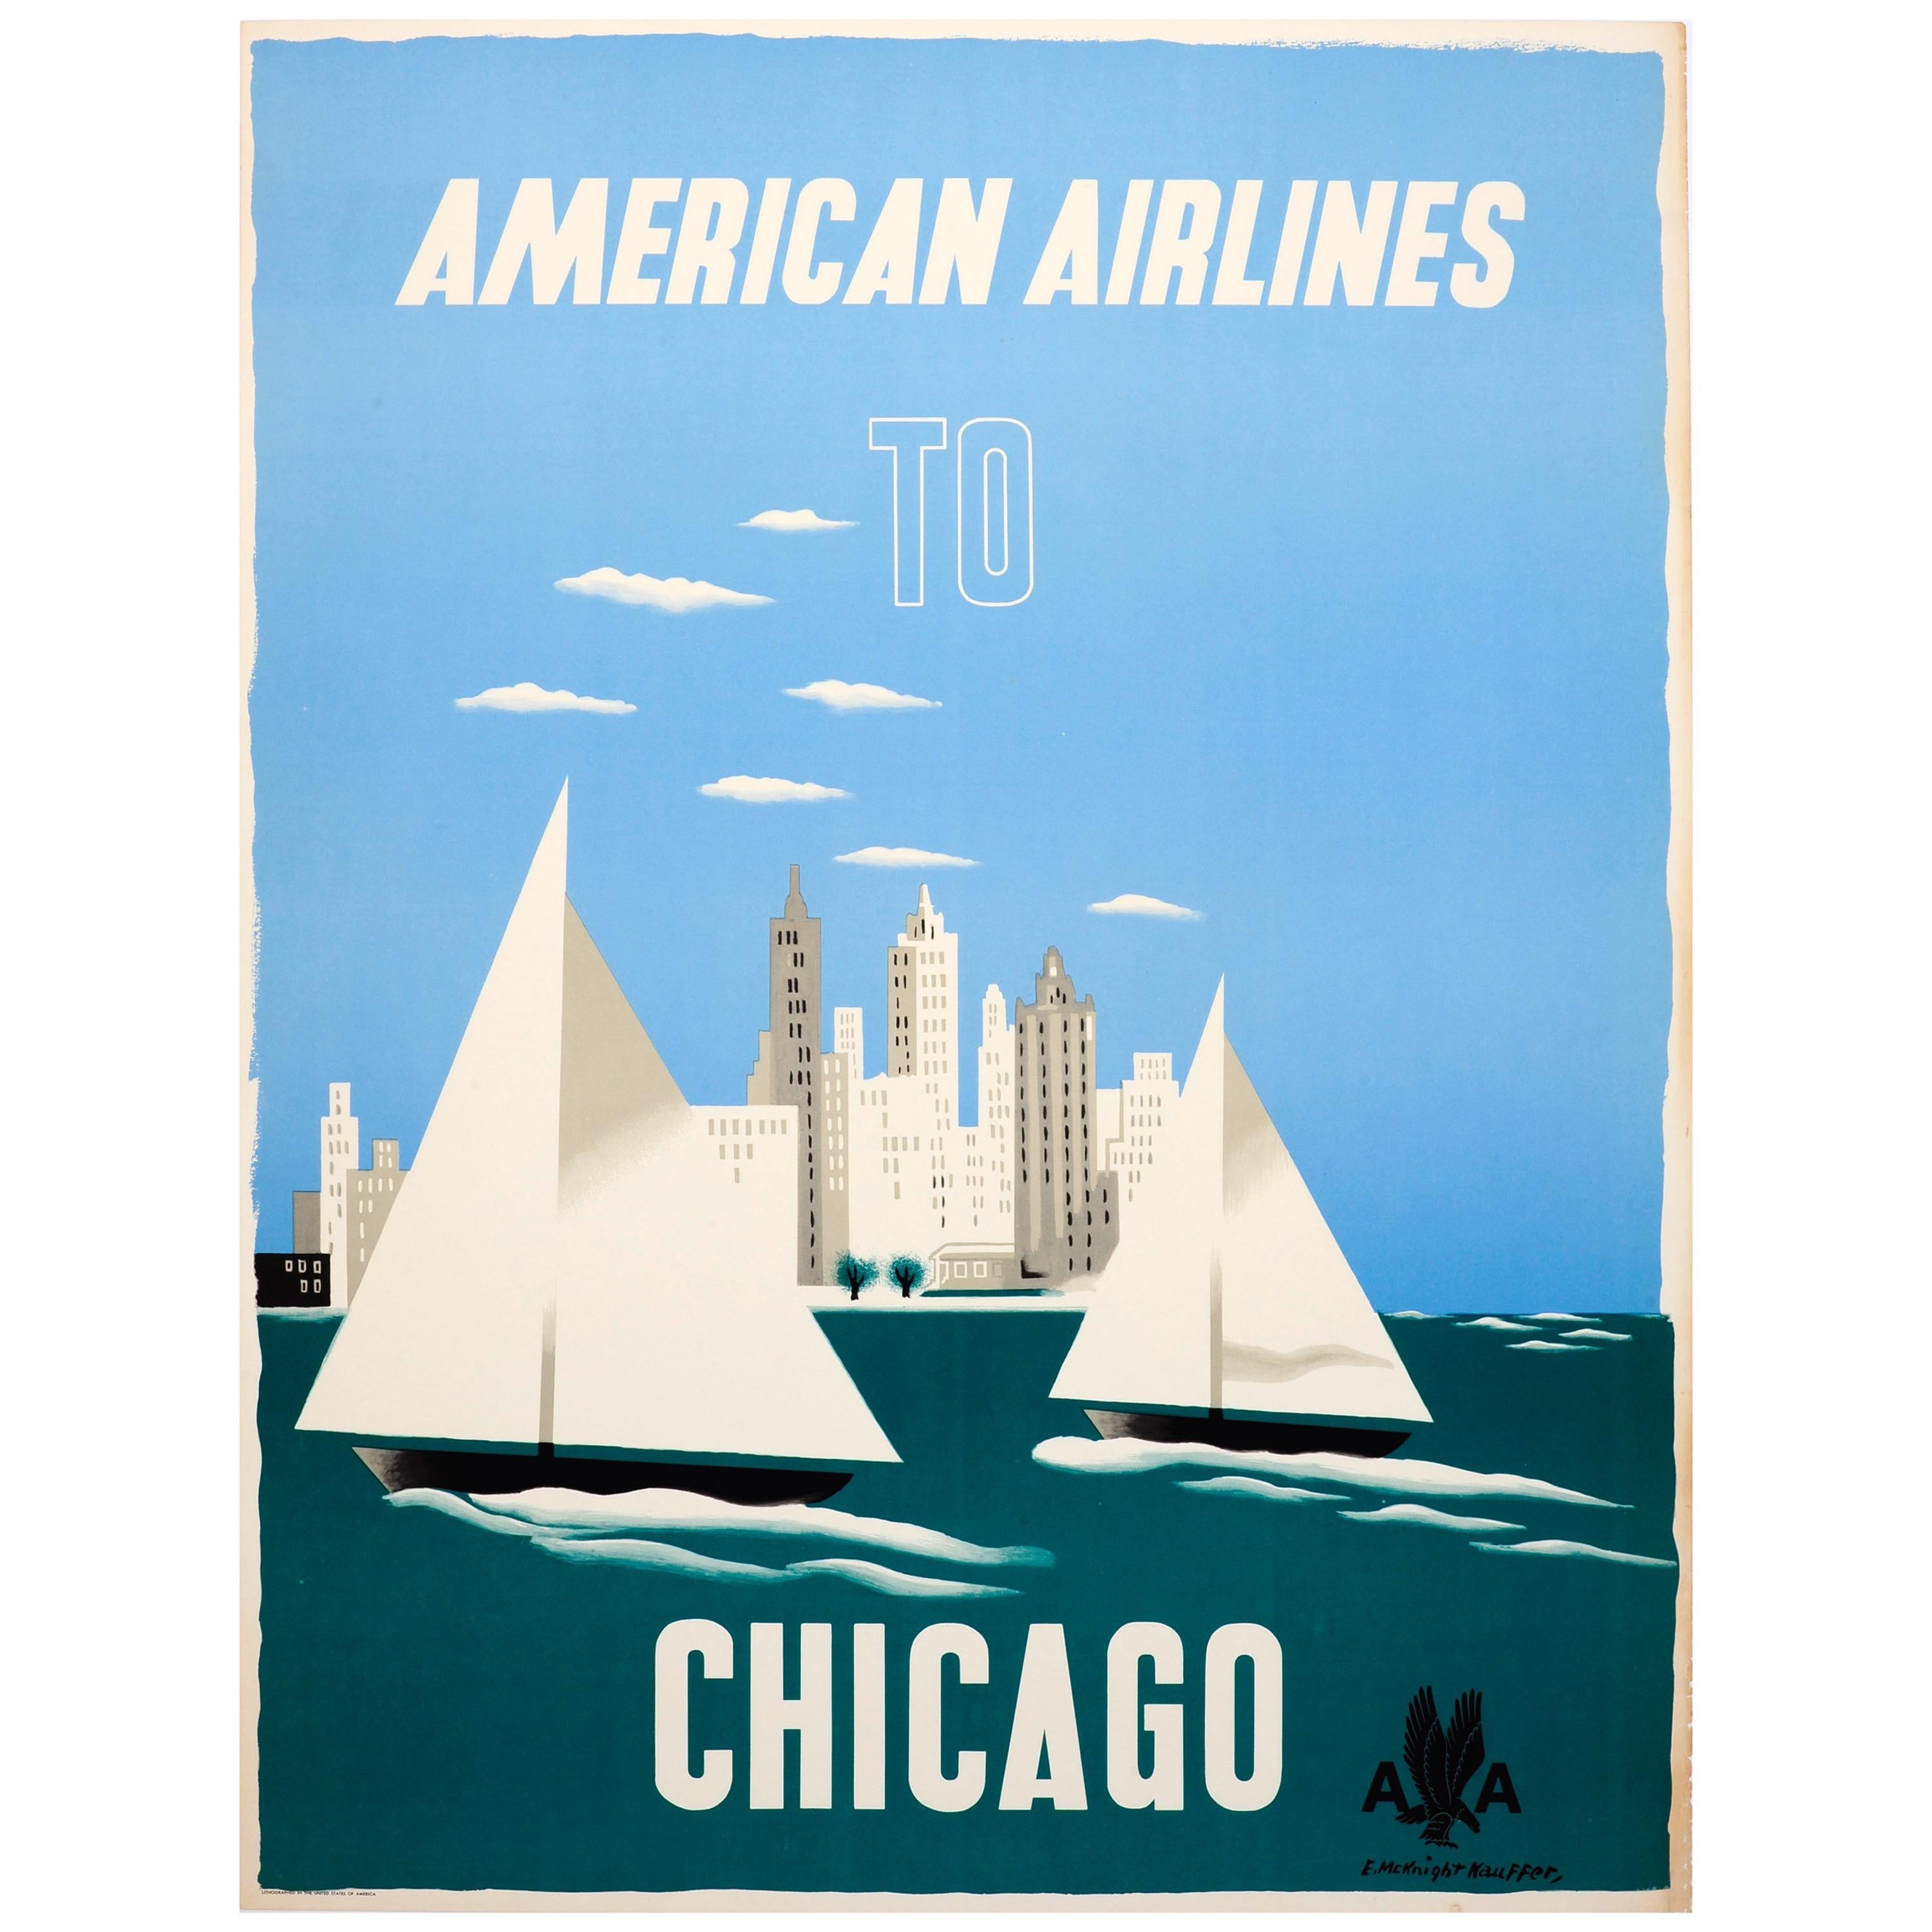 Original Vintage Travel Poster American Airlines to Chicago Ft Sailing City View